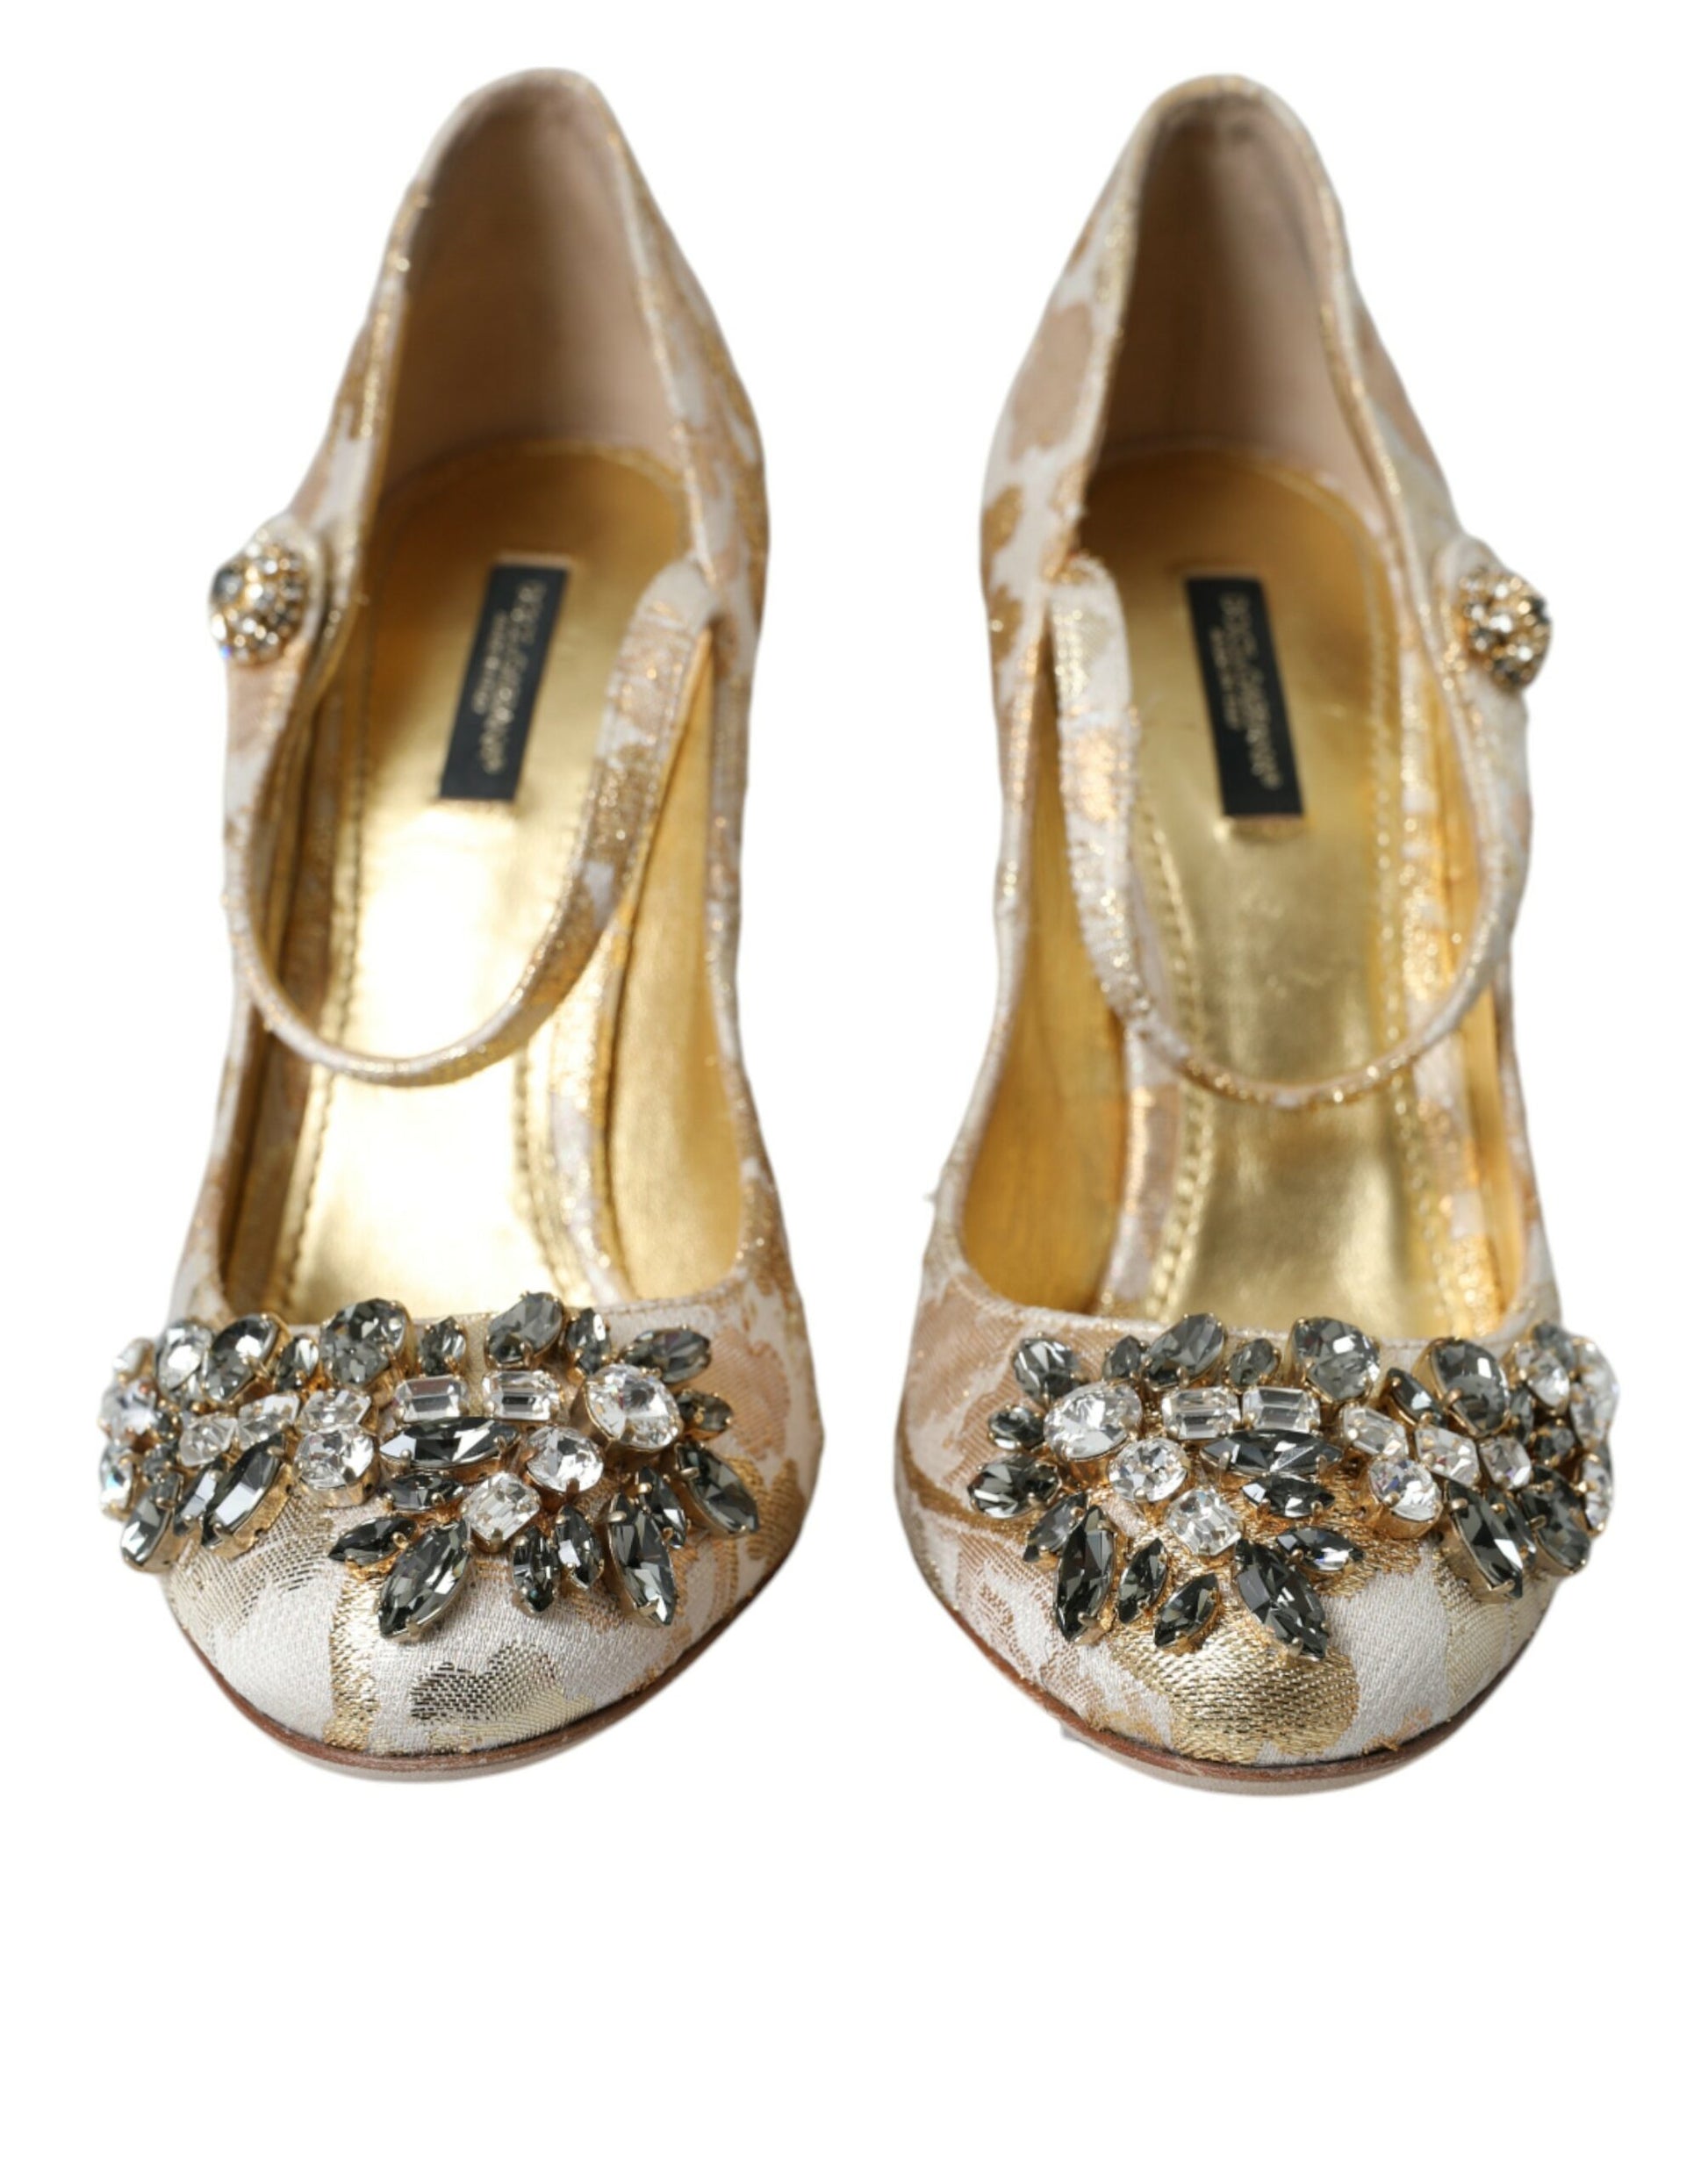 Gold Jacquard Crystal Mary Janes Pumps Shoes